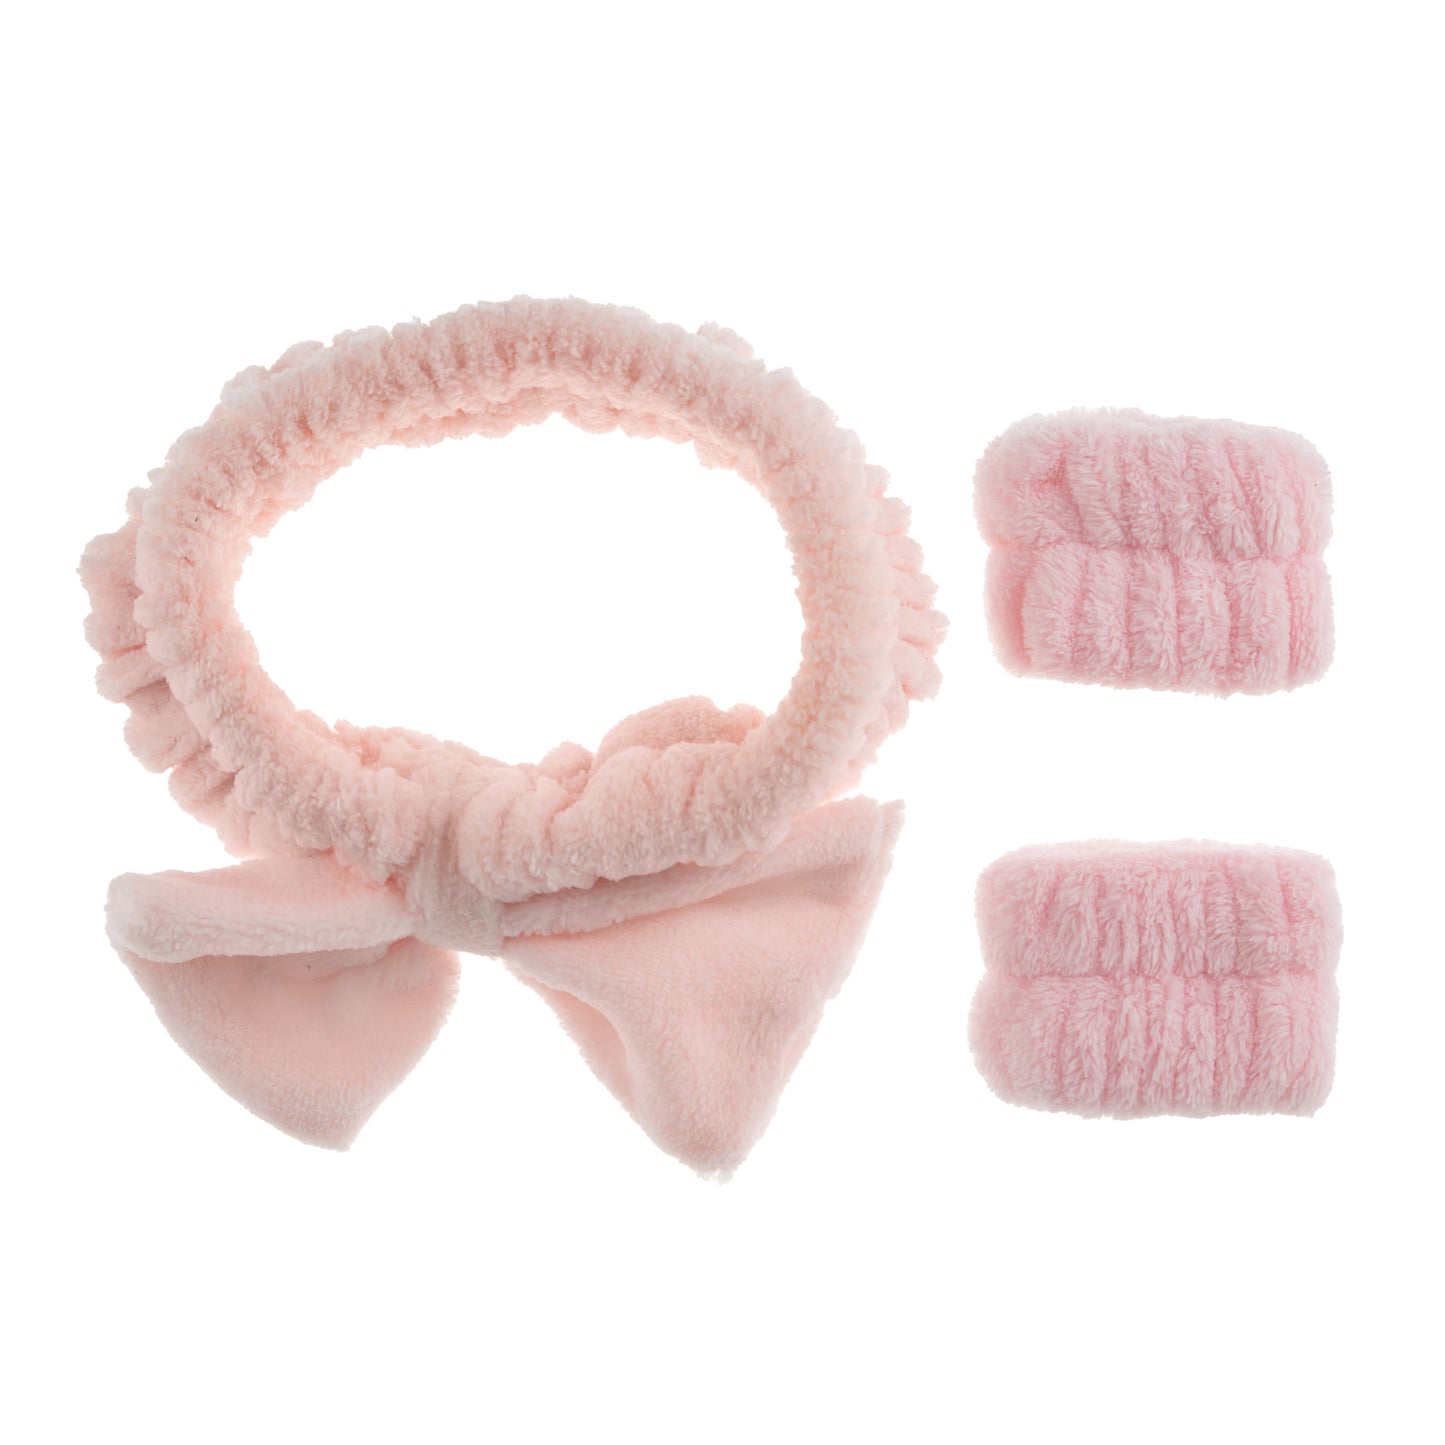 Luxe Hair and Wrist Band Face Washer Set